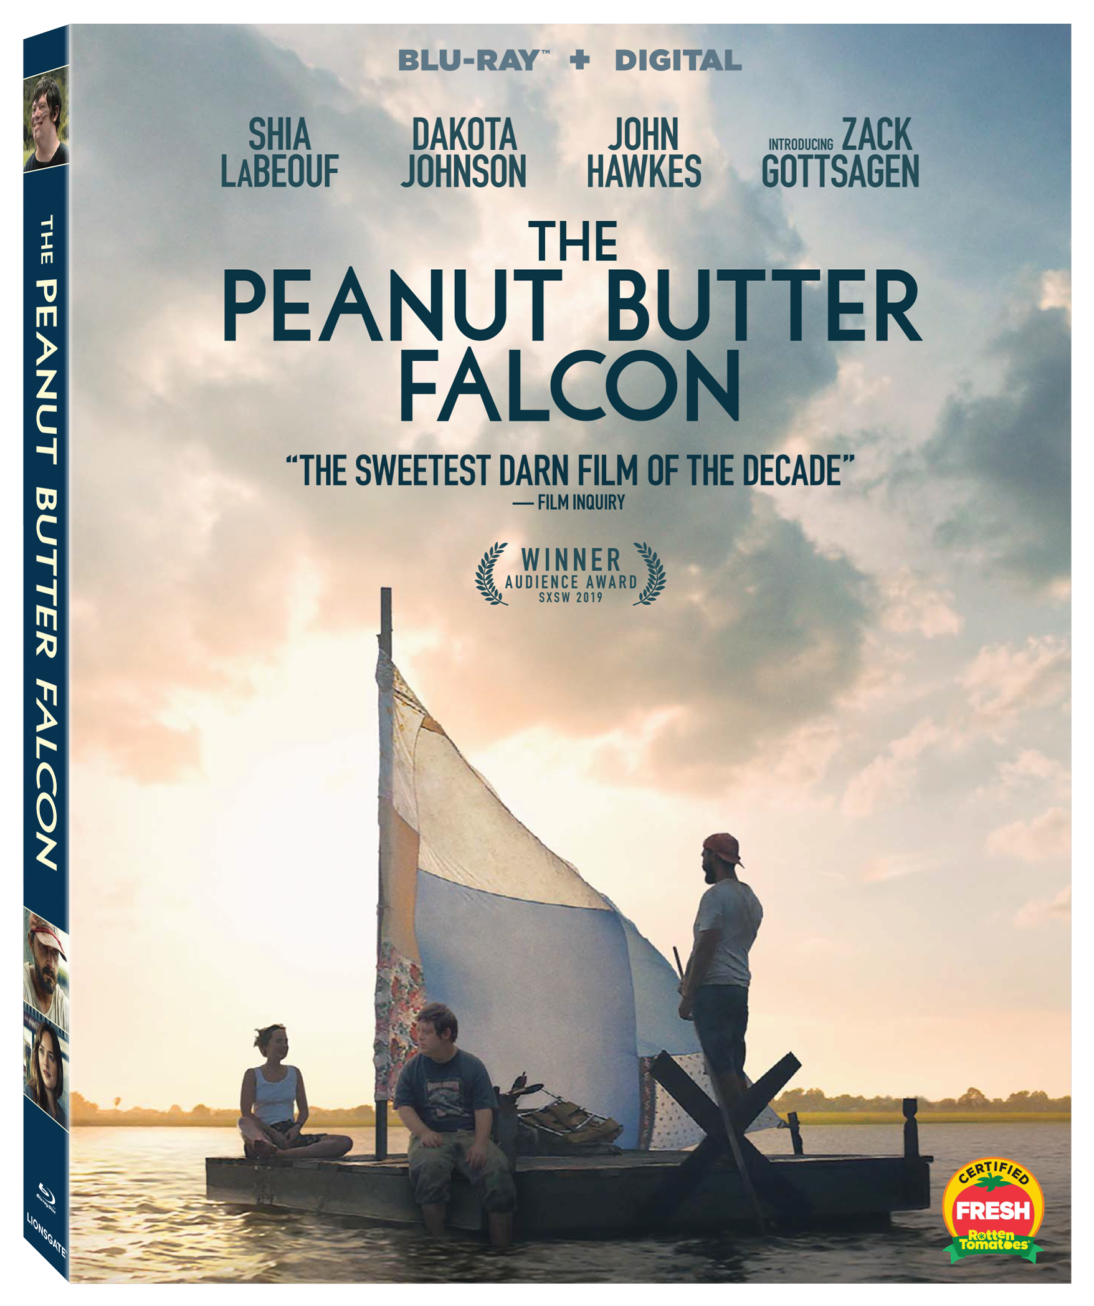 The Peanut Butter Falcon is on Blu-ray, DVD & Digital NOW!